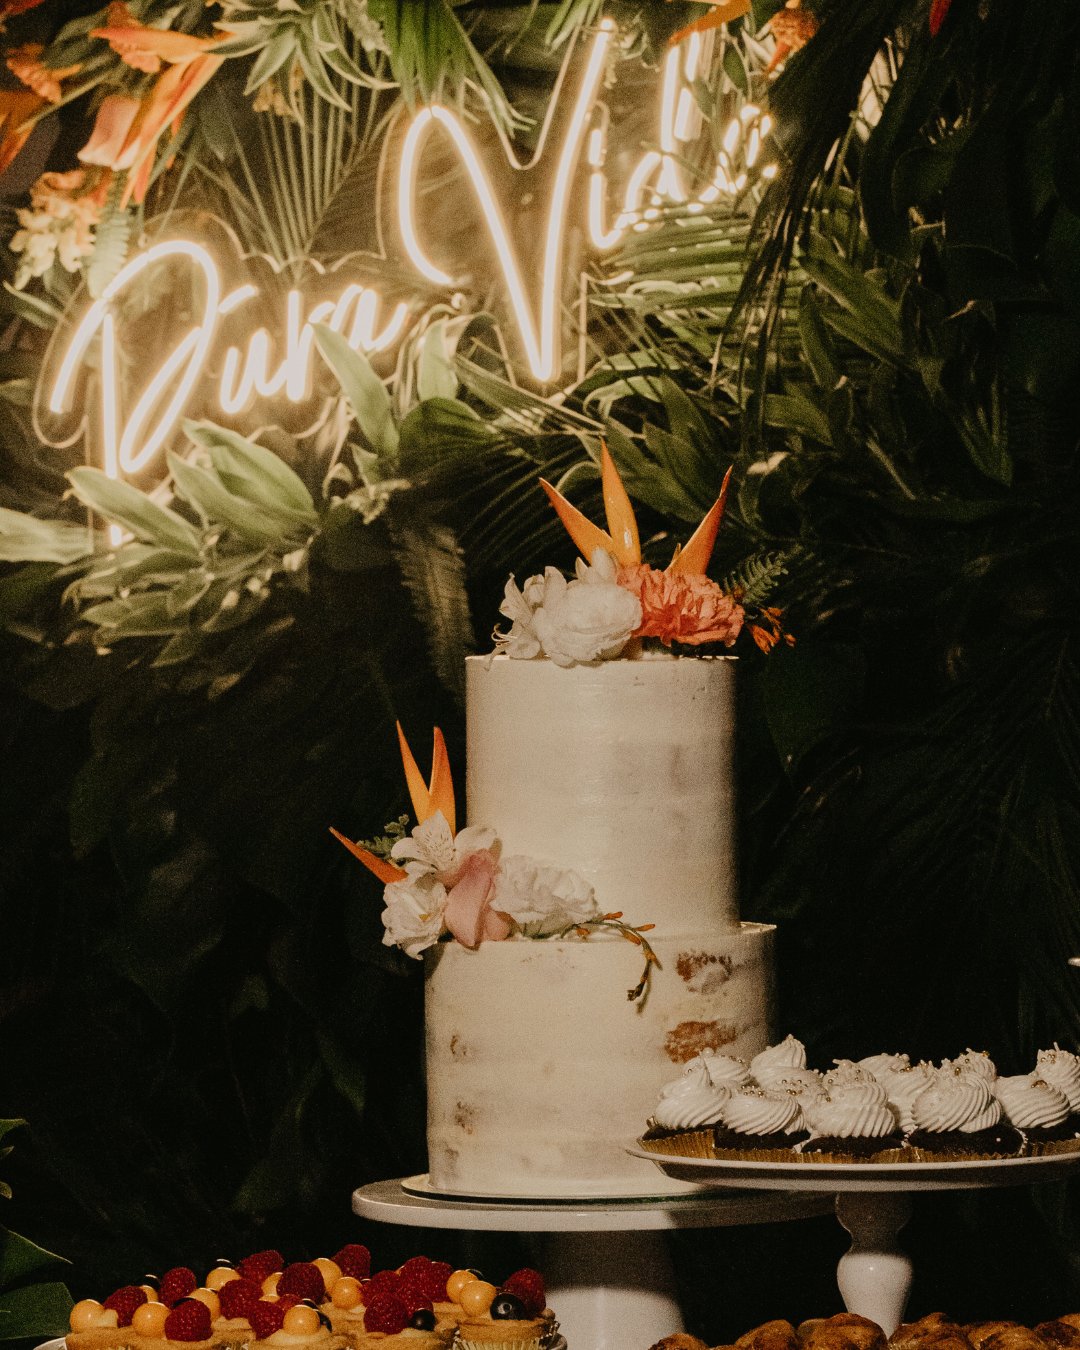 A white two-tiered cake adorned with vibrant tropical flowers stands on a table surrounded by assorted pastries and fresh fruits. Lush green foliage forms the background with a neon sign behind, partially visible with the words "Pura Vida.